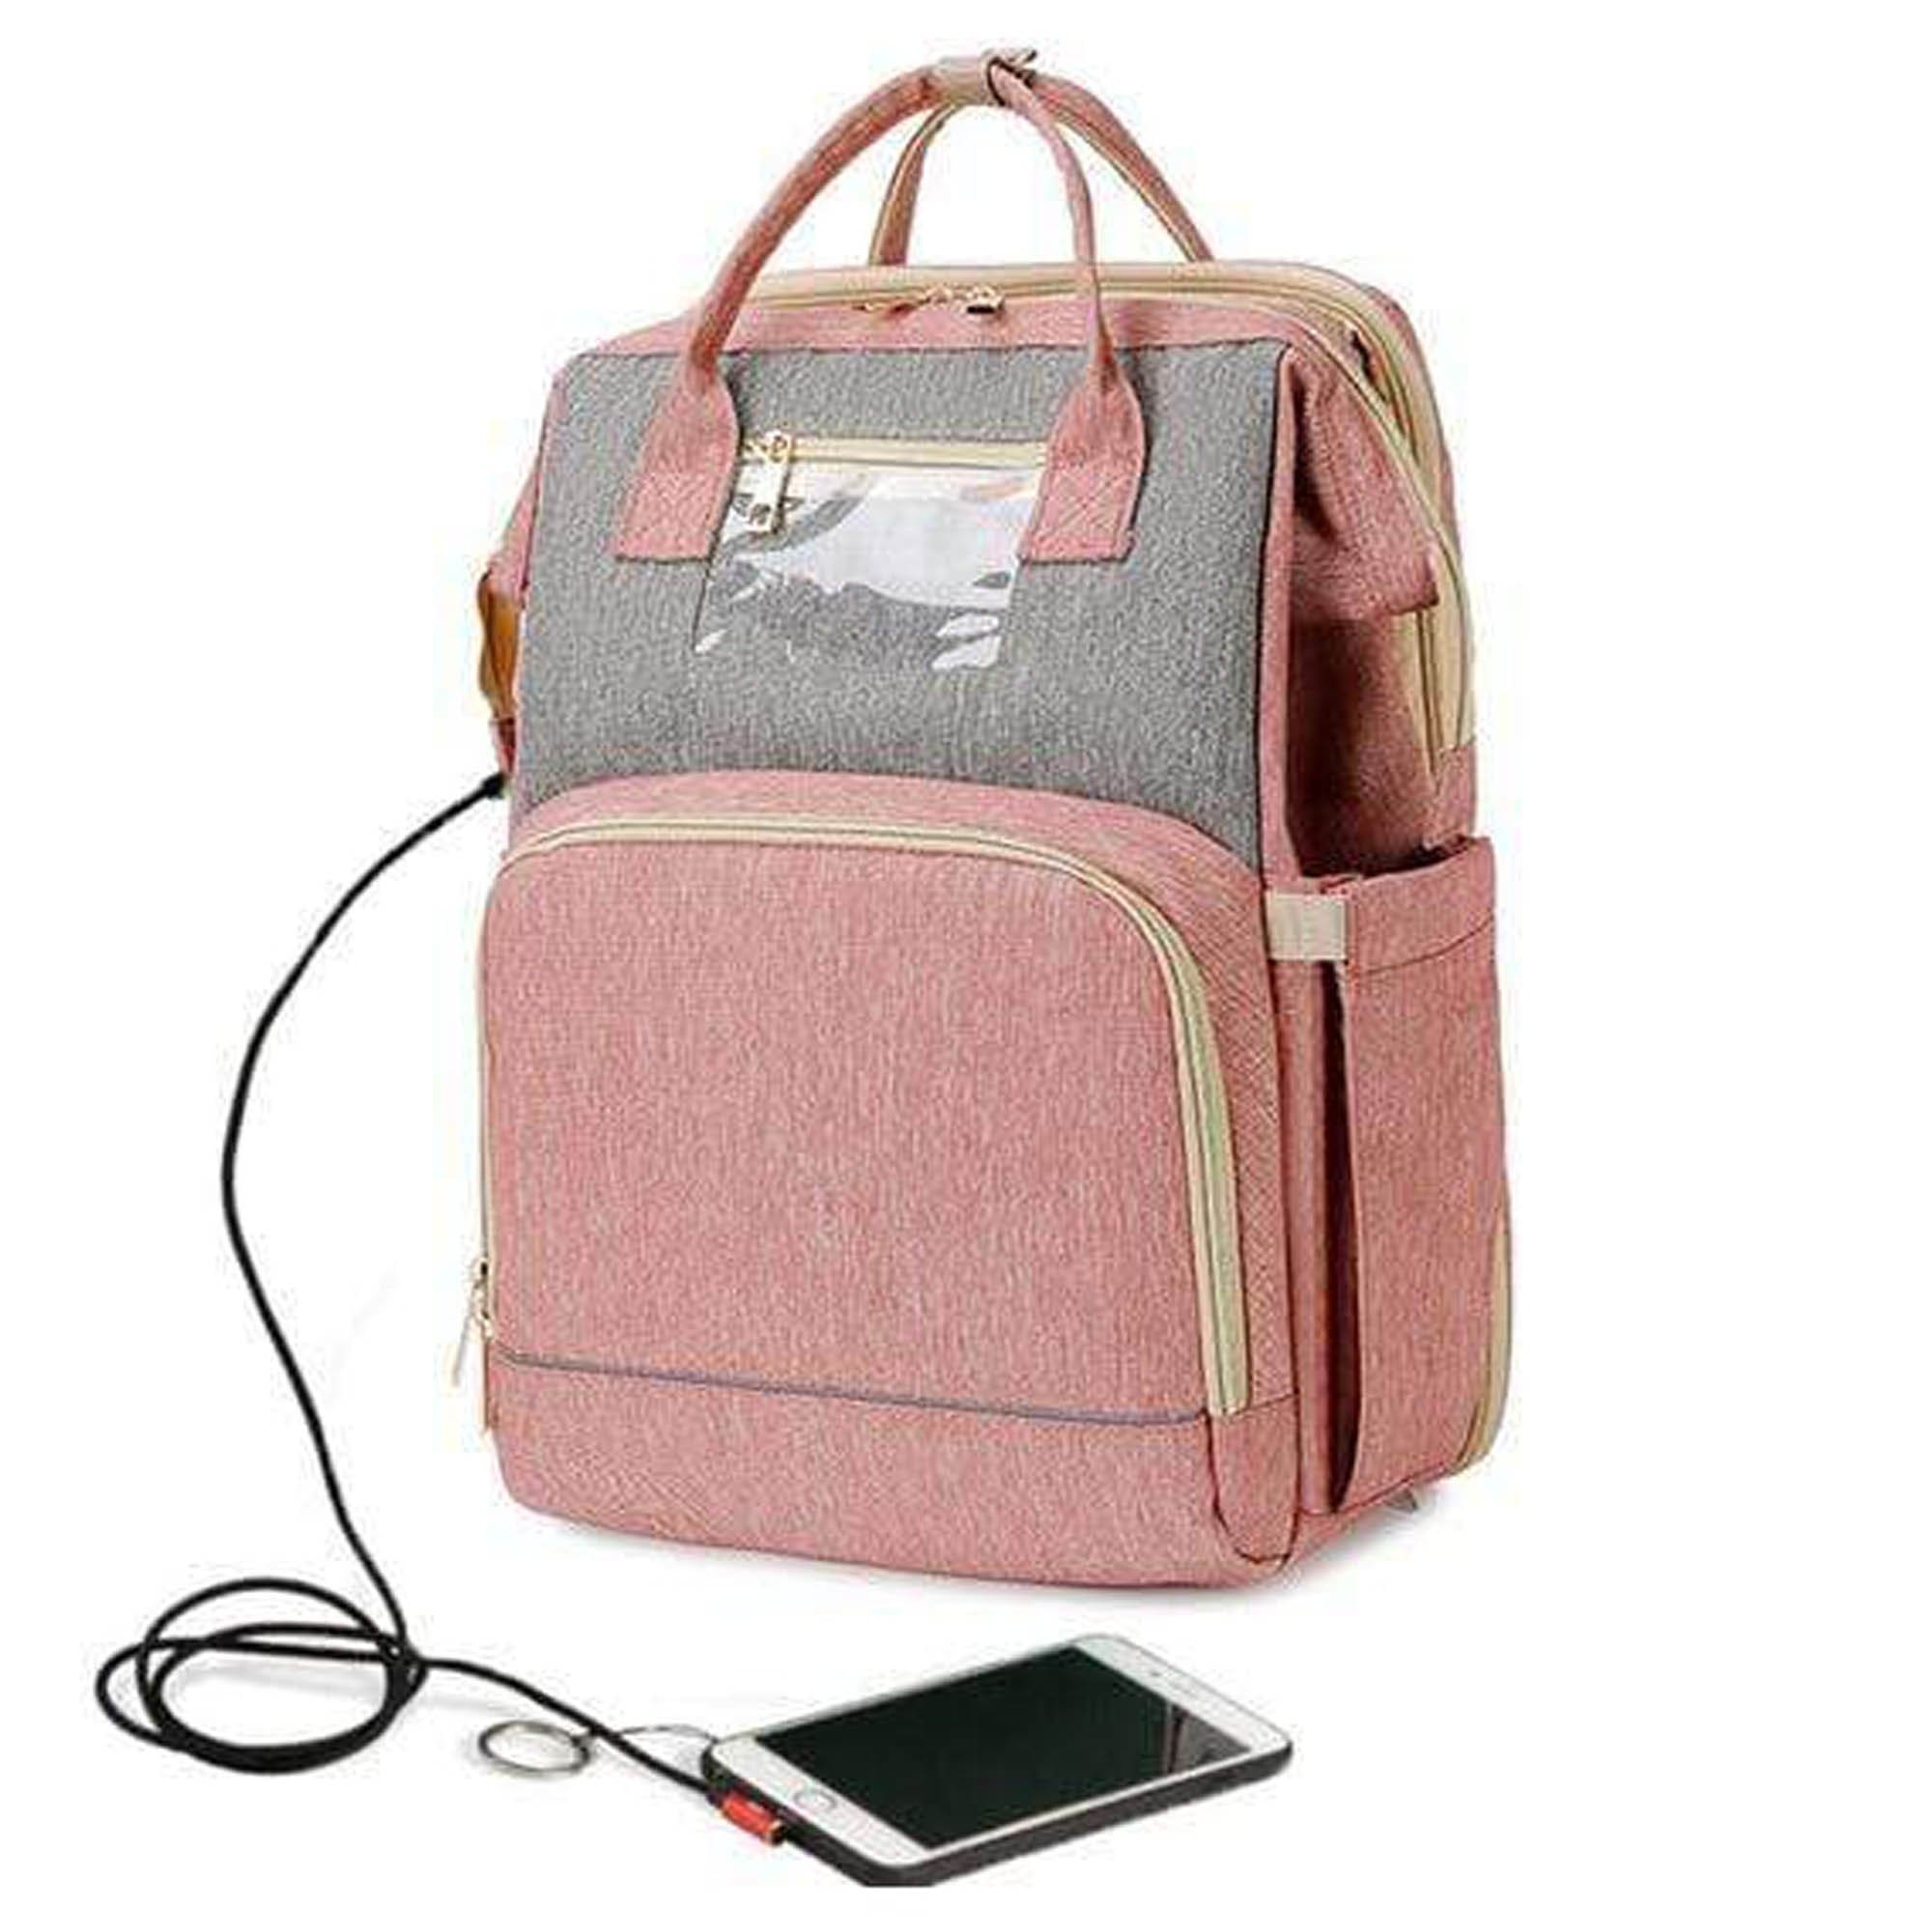 3 in 1 Diaper Bag Backpack with Changing Station India  Ubuy